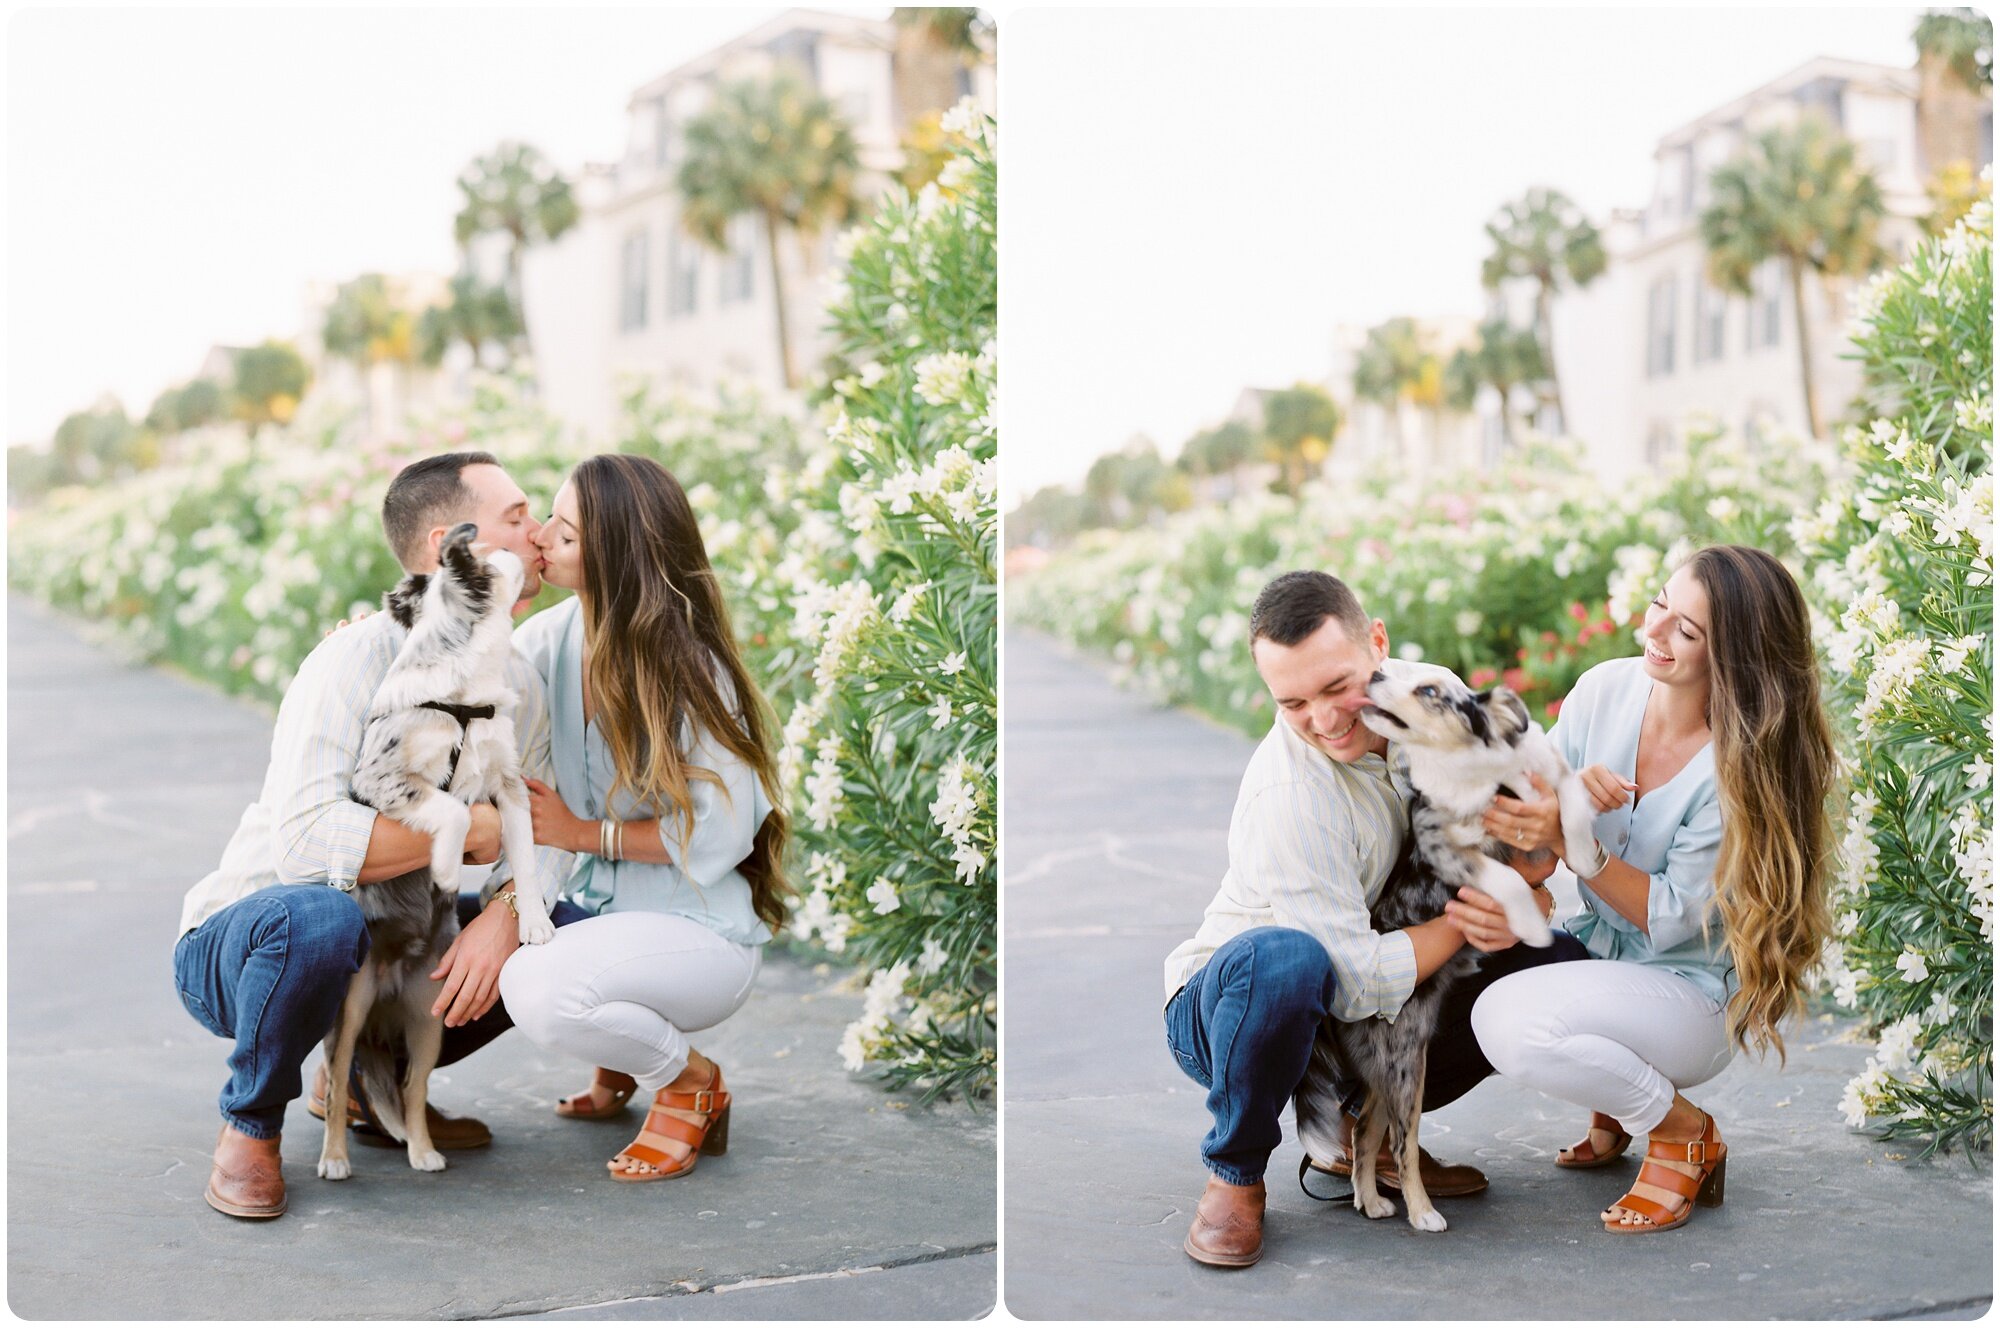 rainbow_row_yellow_blue_outfit_battery_downtown_charleston_engagement_puppy_outdoor_wedding_photographers_husband_wife_team_kailee_tim_kailee_dimeglio_photography_charleston_traveling_photographers_0017.jpg